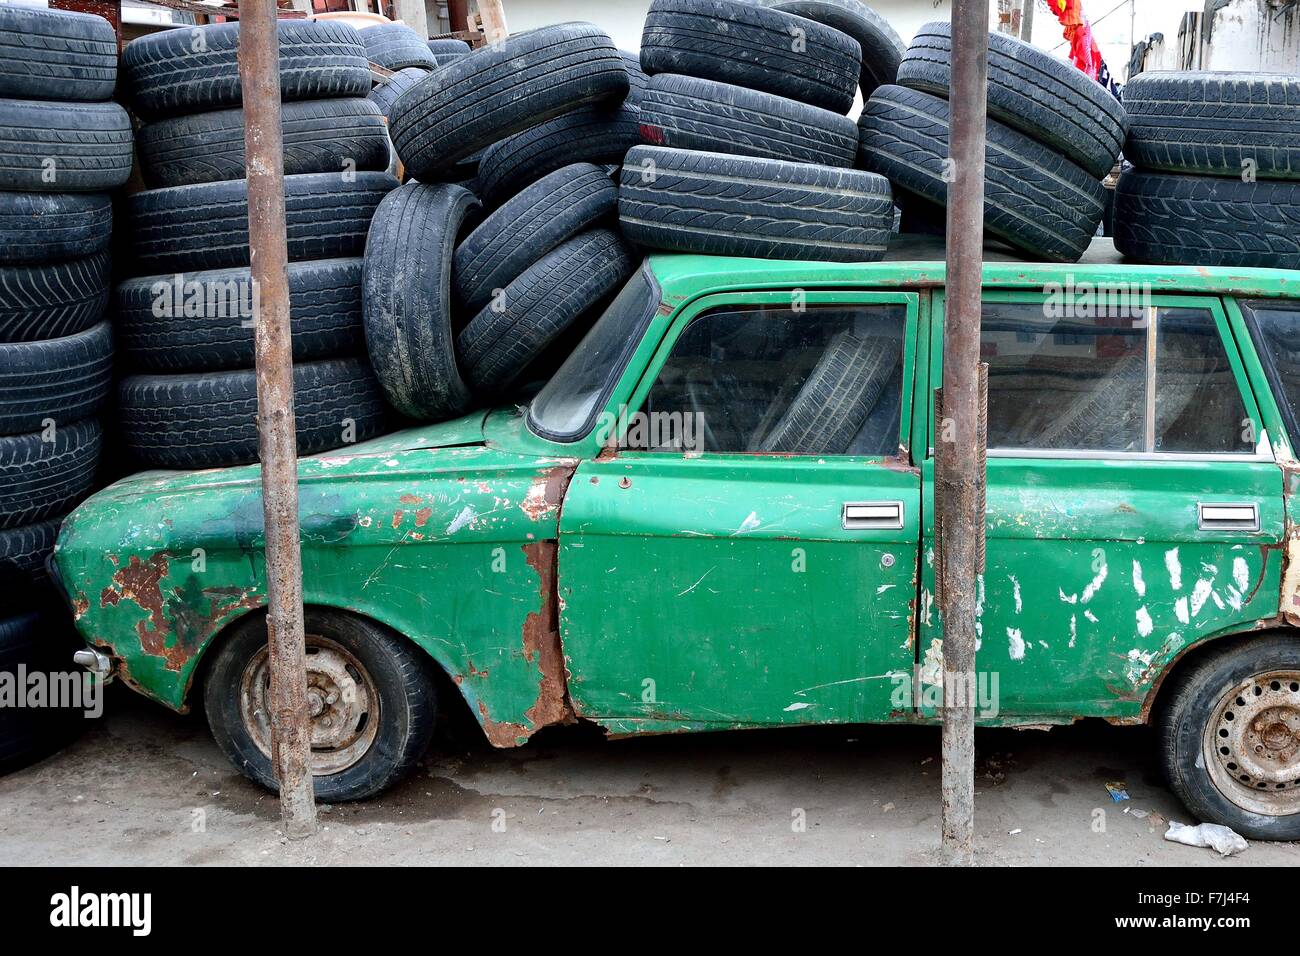 Old green Azerbaijani car in Baku, under a pile of tyres, from the side Stock Photo